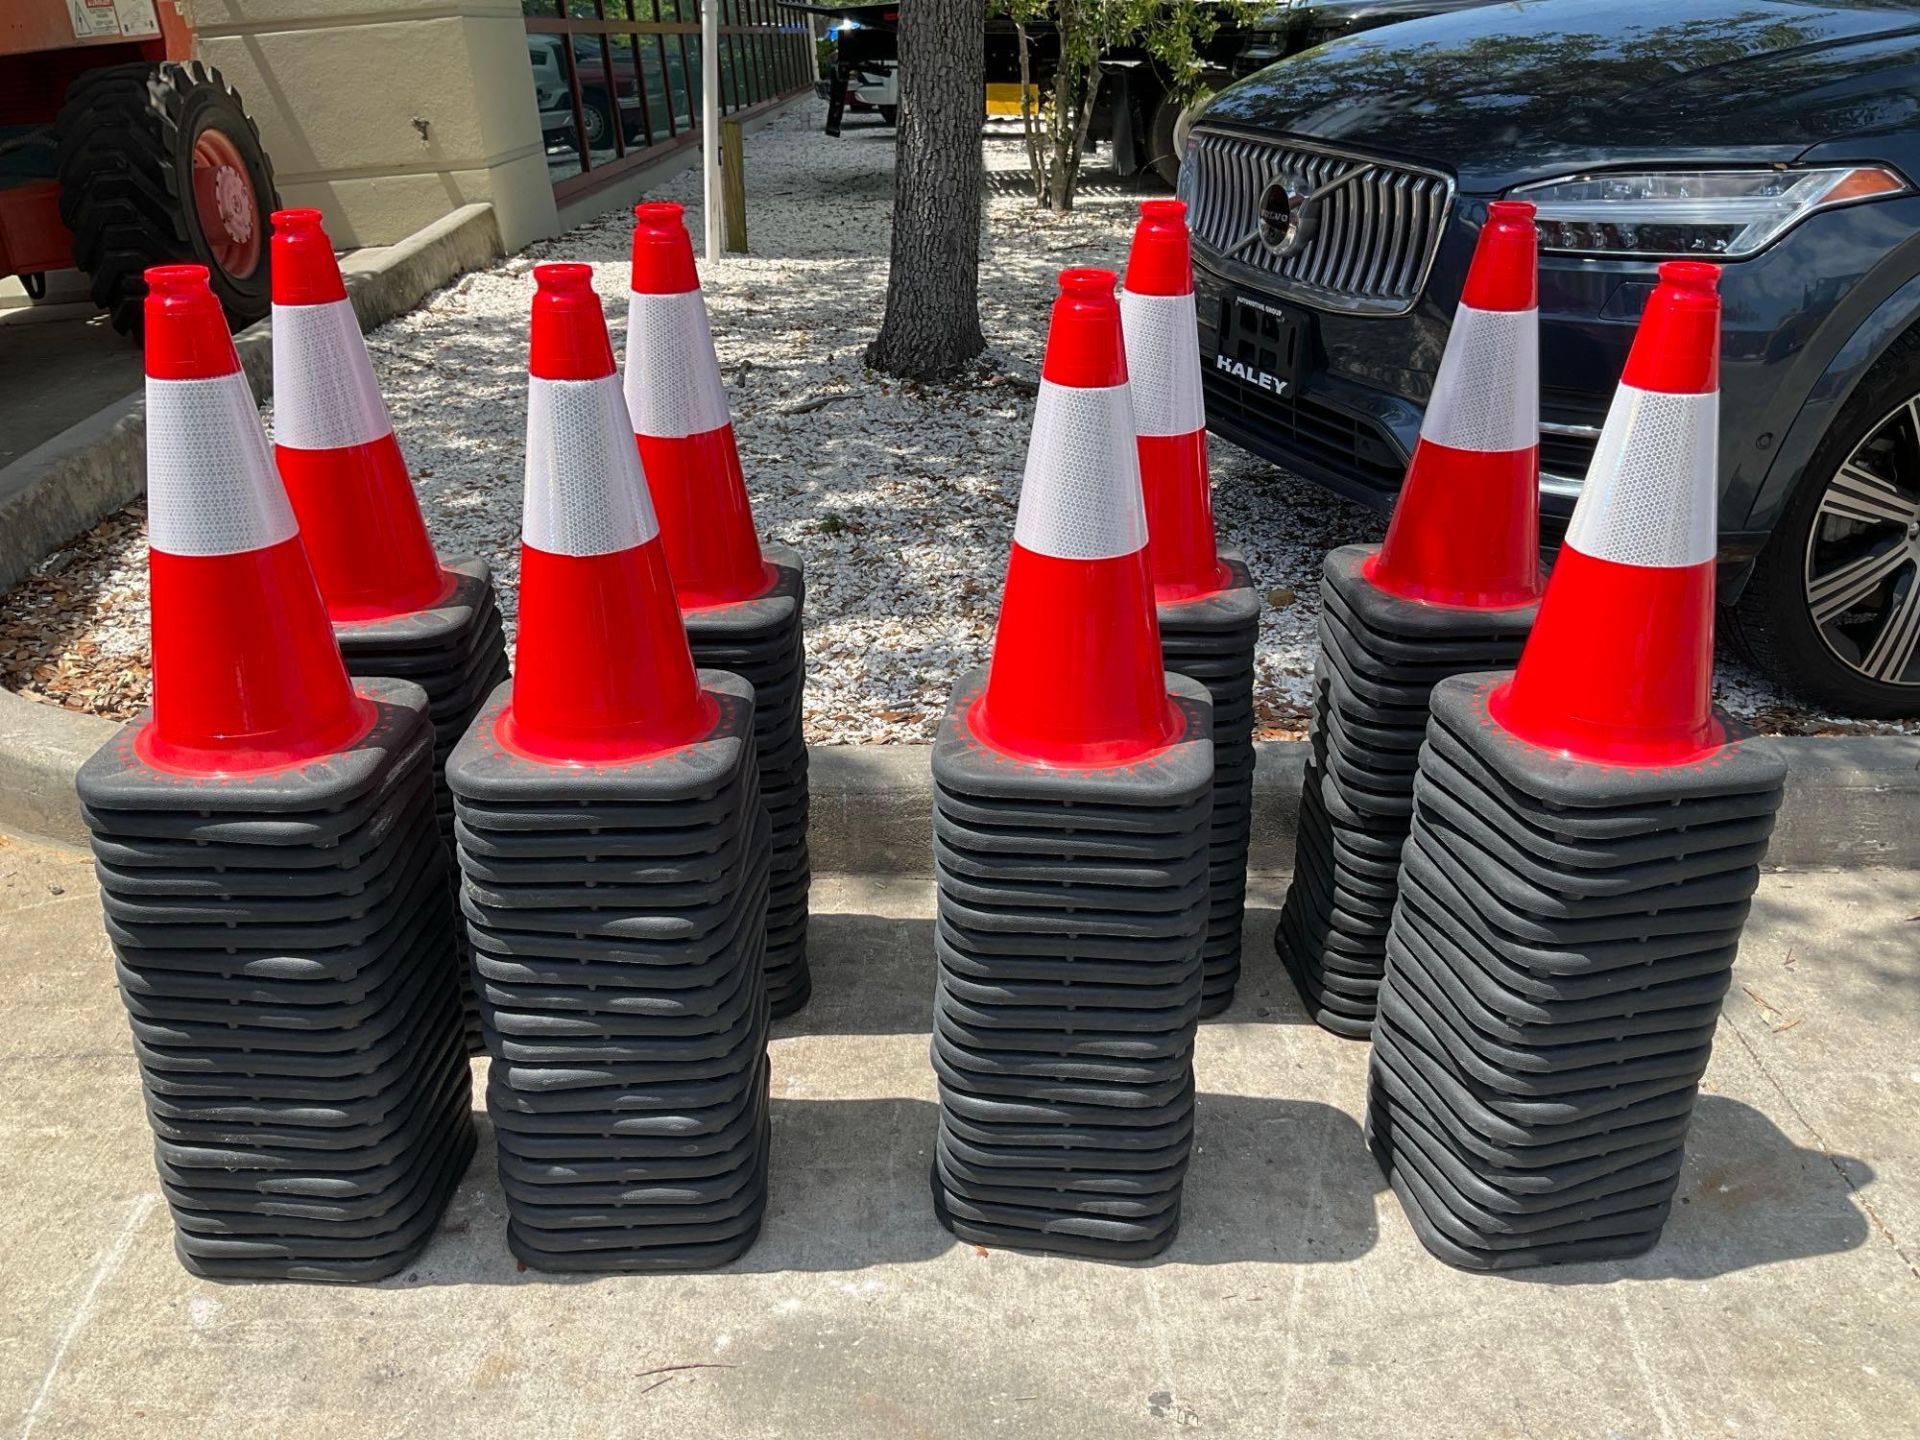 20 SAFETY CONES, 18in TALL - Image 7 of 7